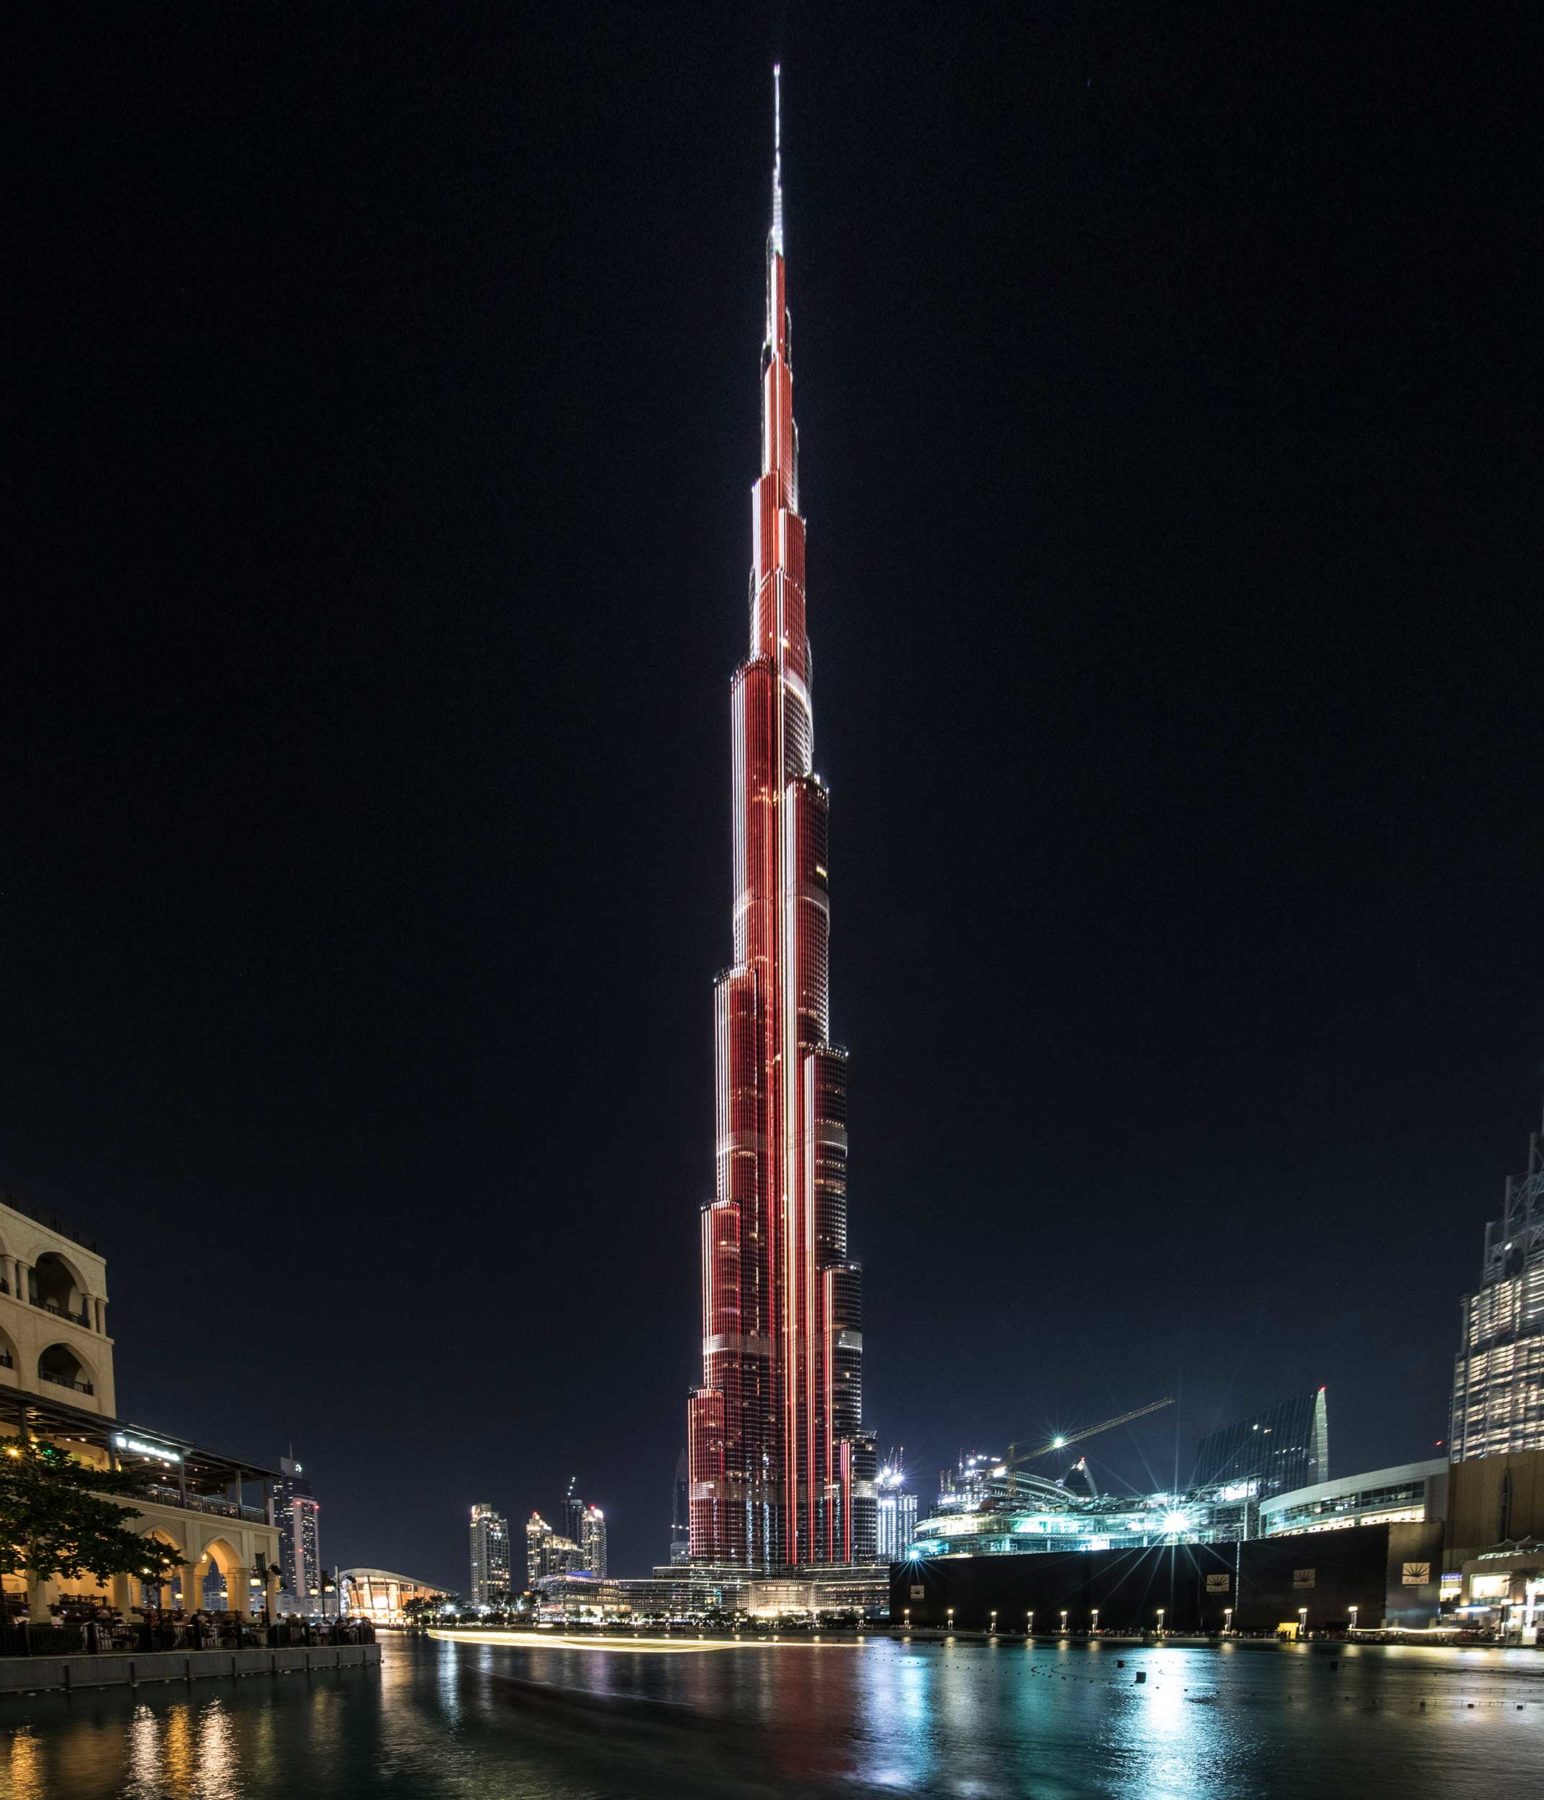 A tall, red-lighted spire of a building rising above the Dubai skyline